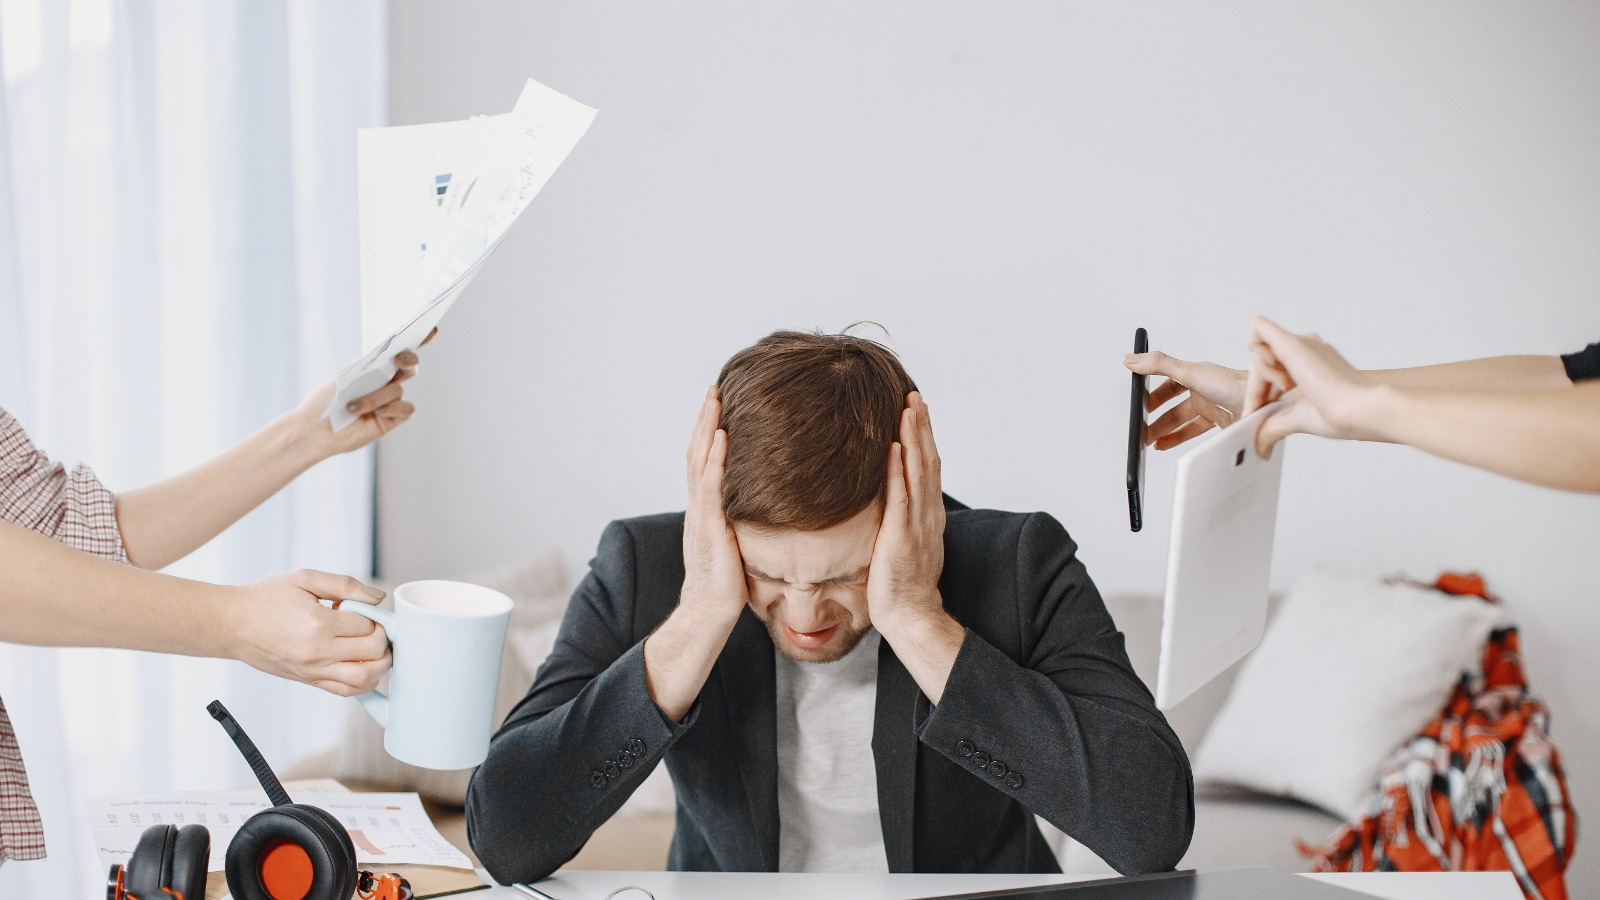 Employee Behaviour: How to Handle Difficult Employees